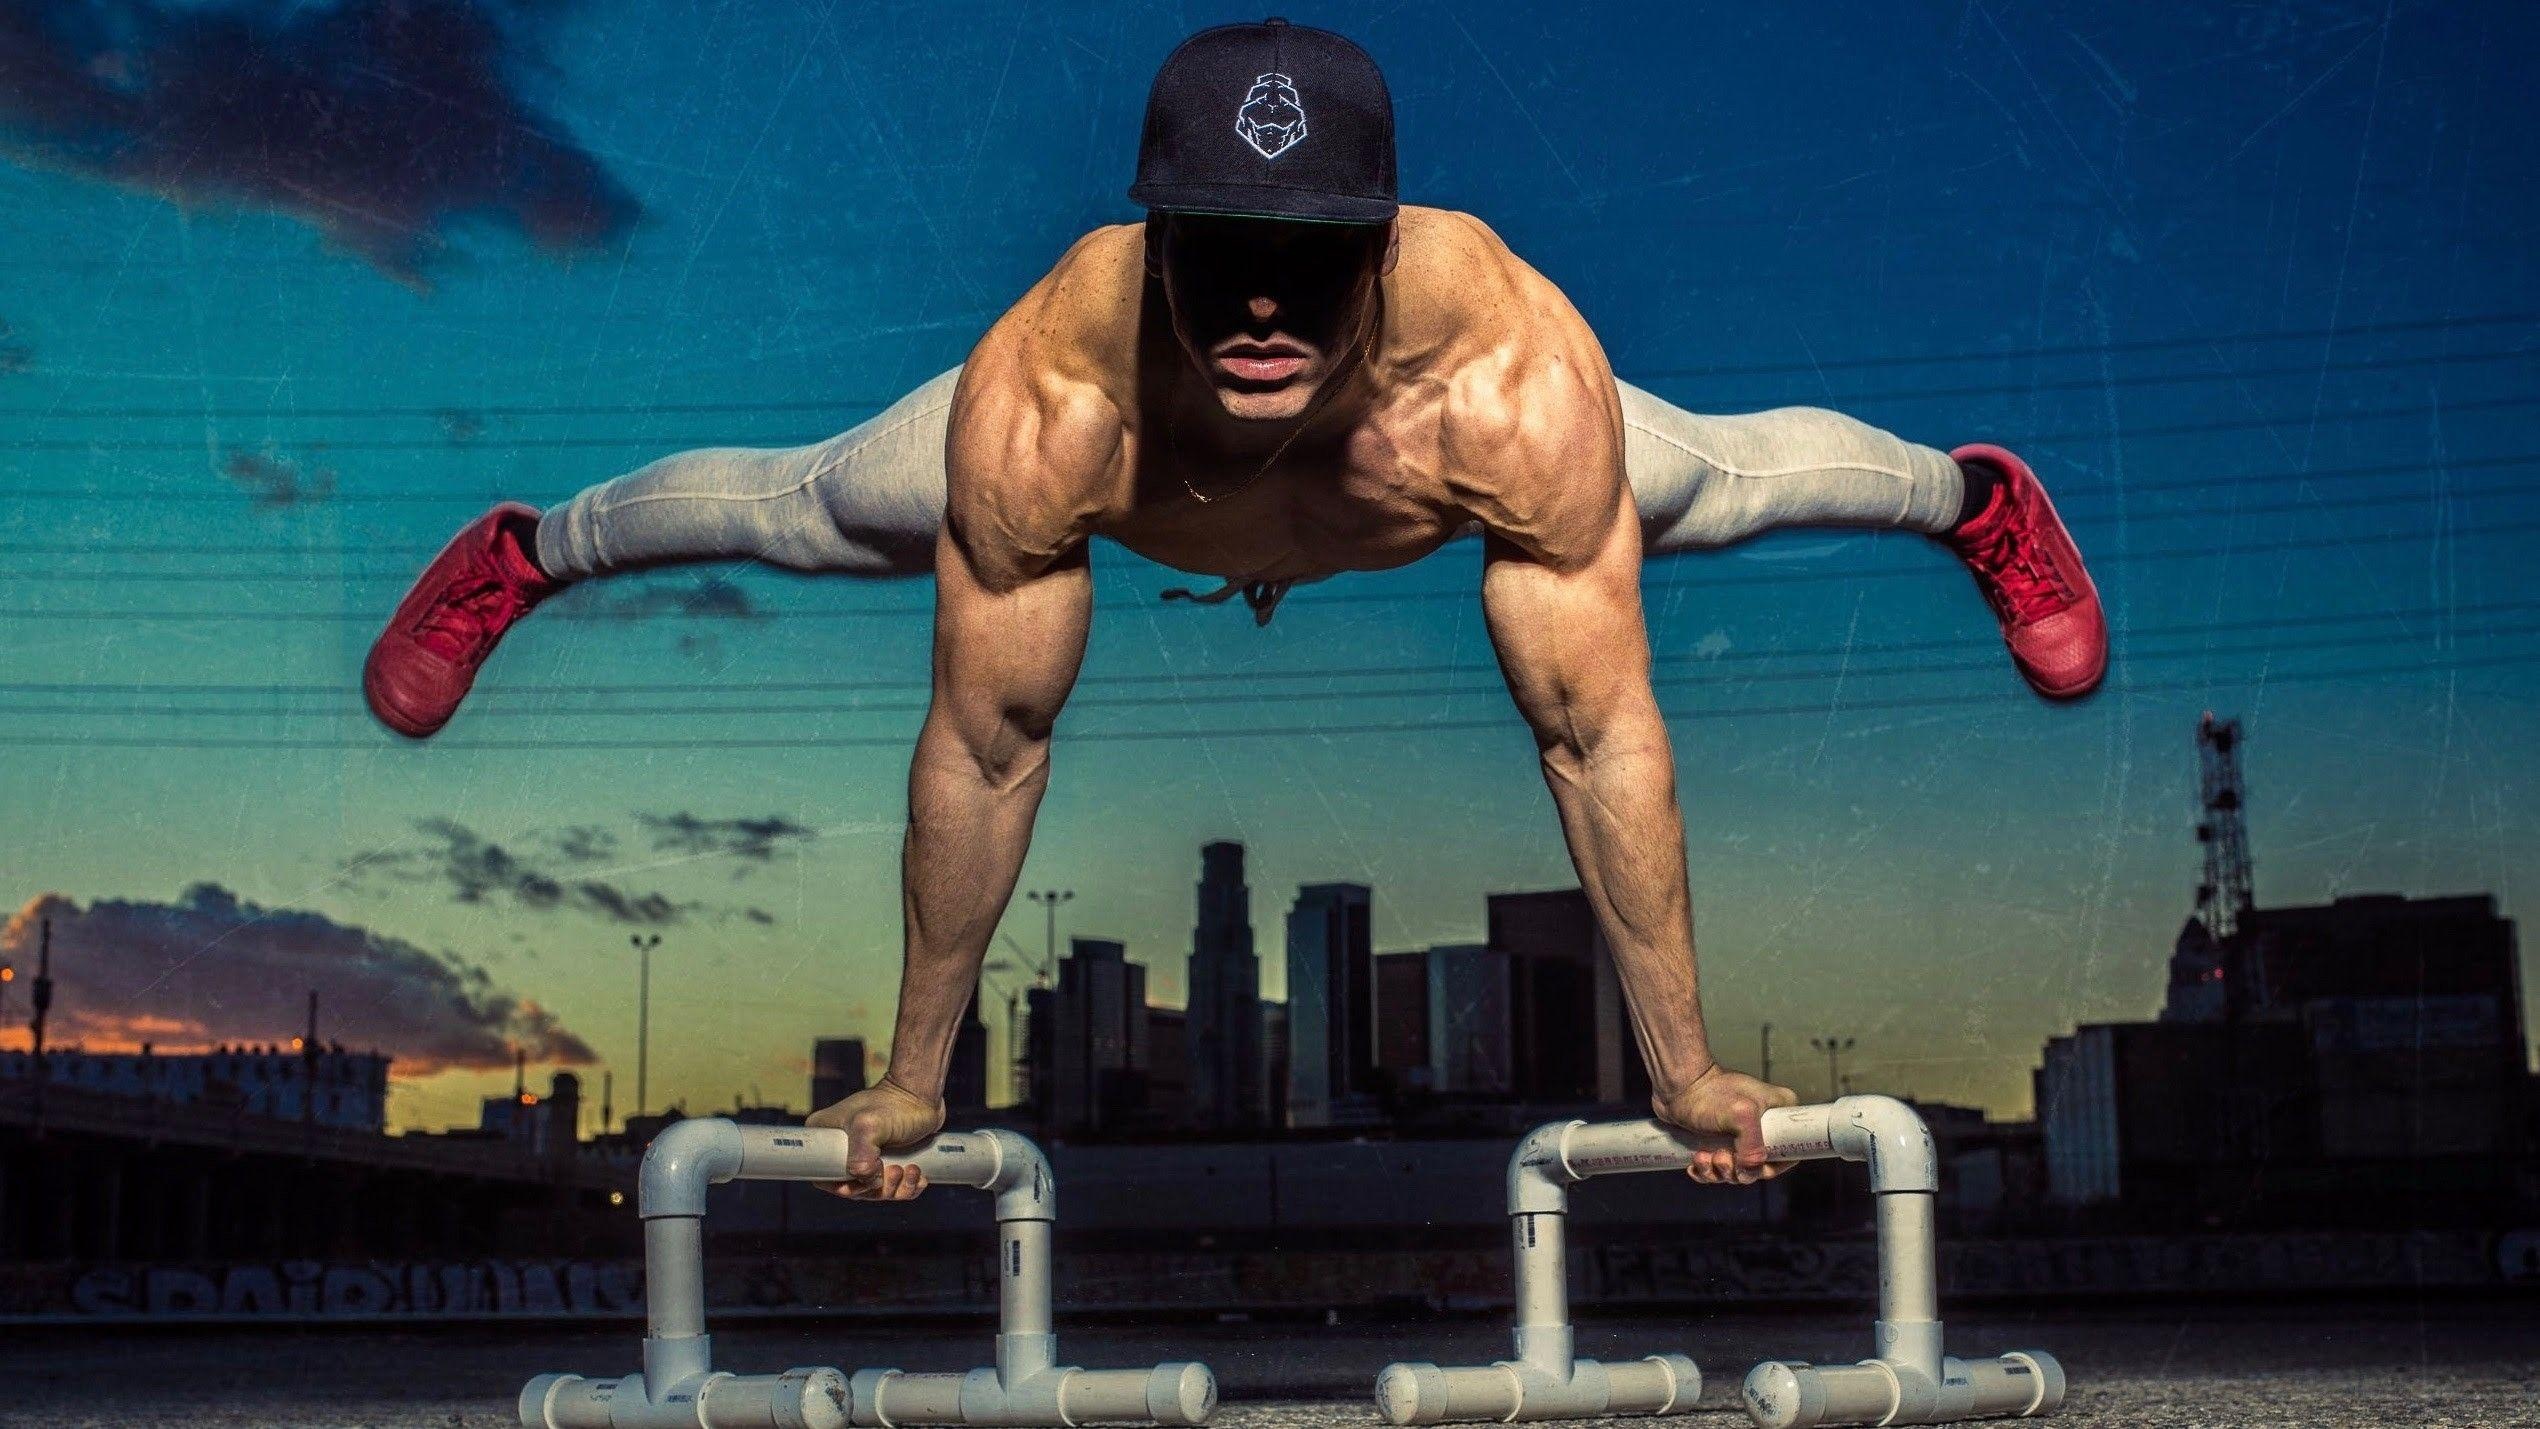 Calisthenics: Street workout and active sport, Gymnastics as a strength training. 2540x1430 HD Background.